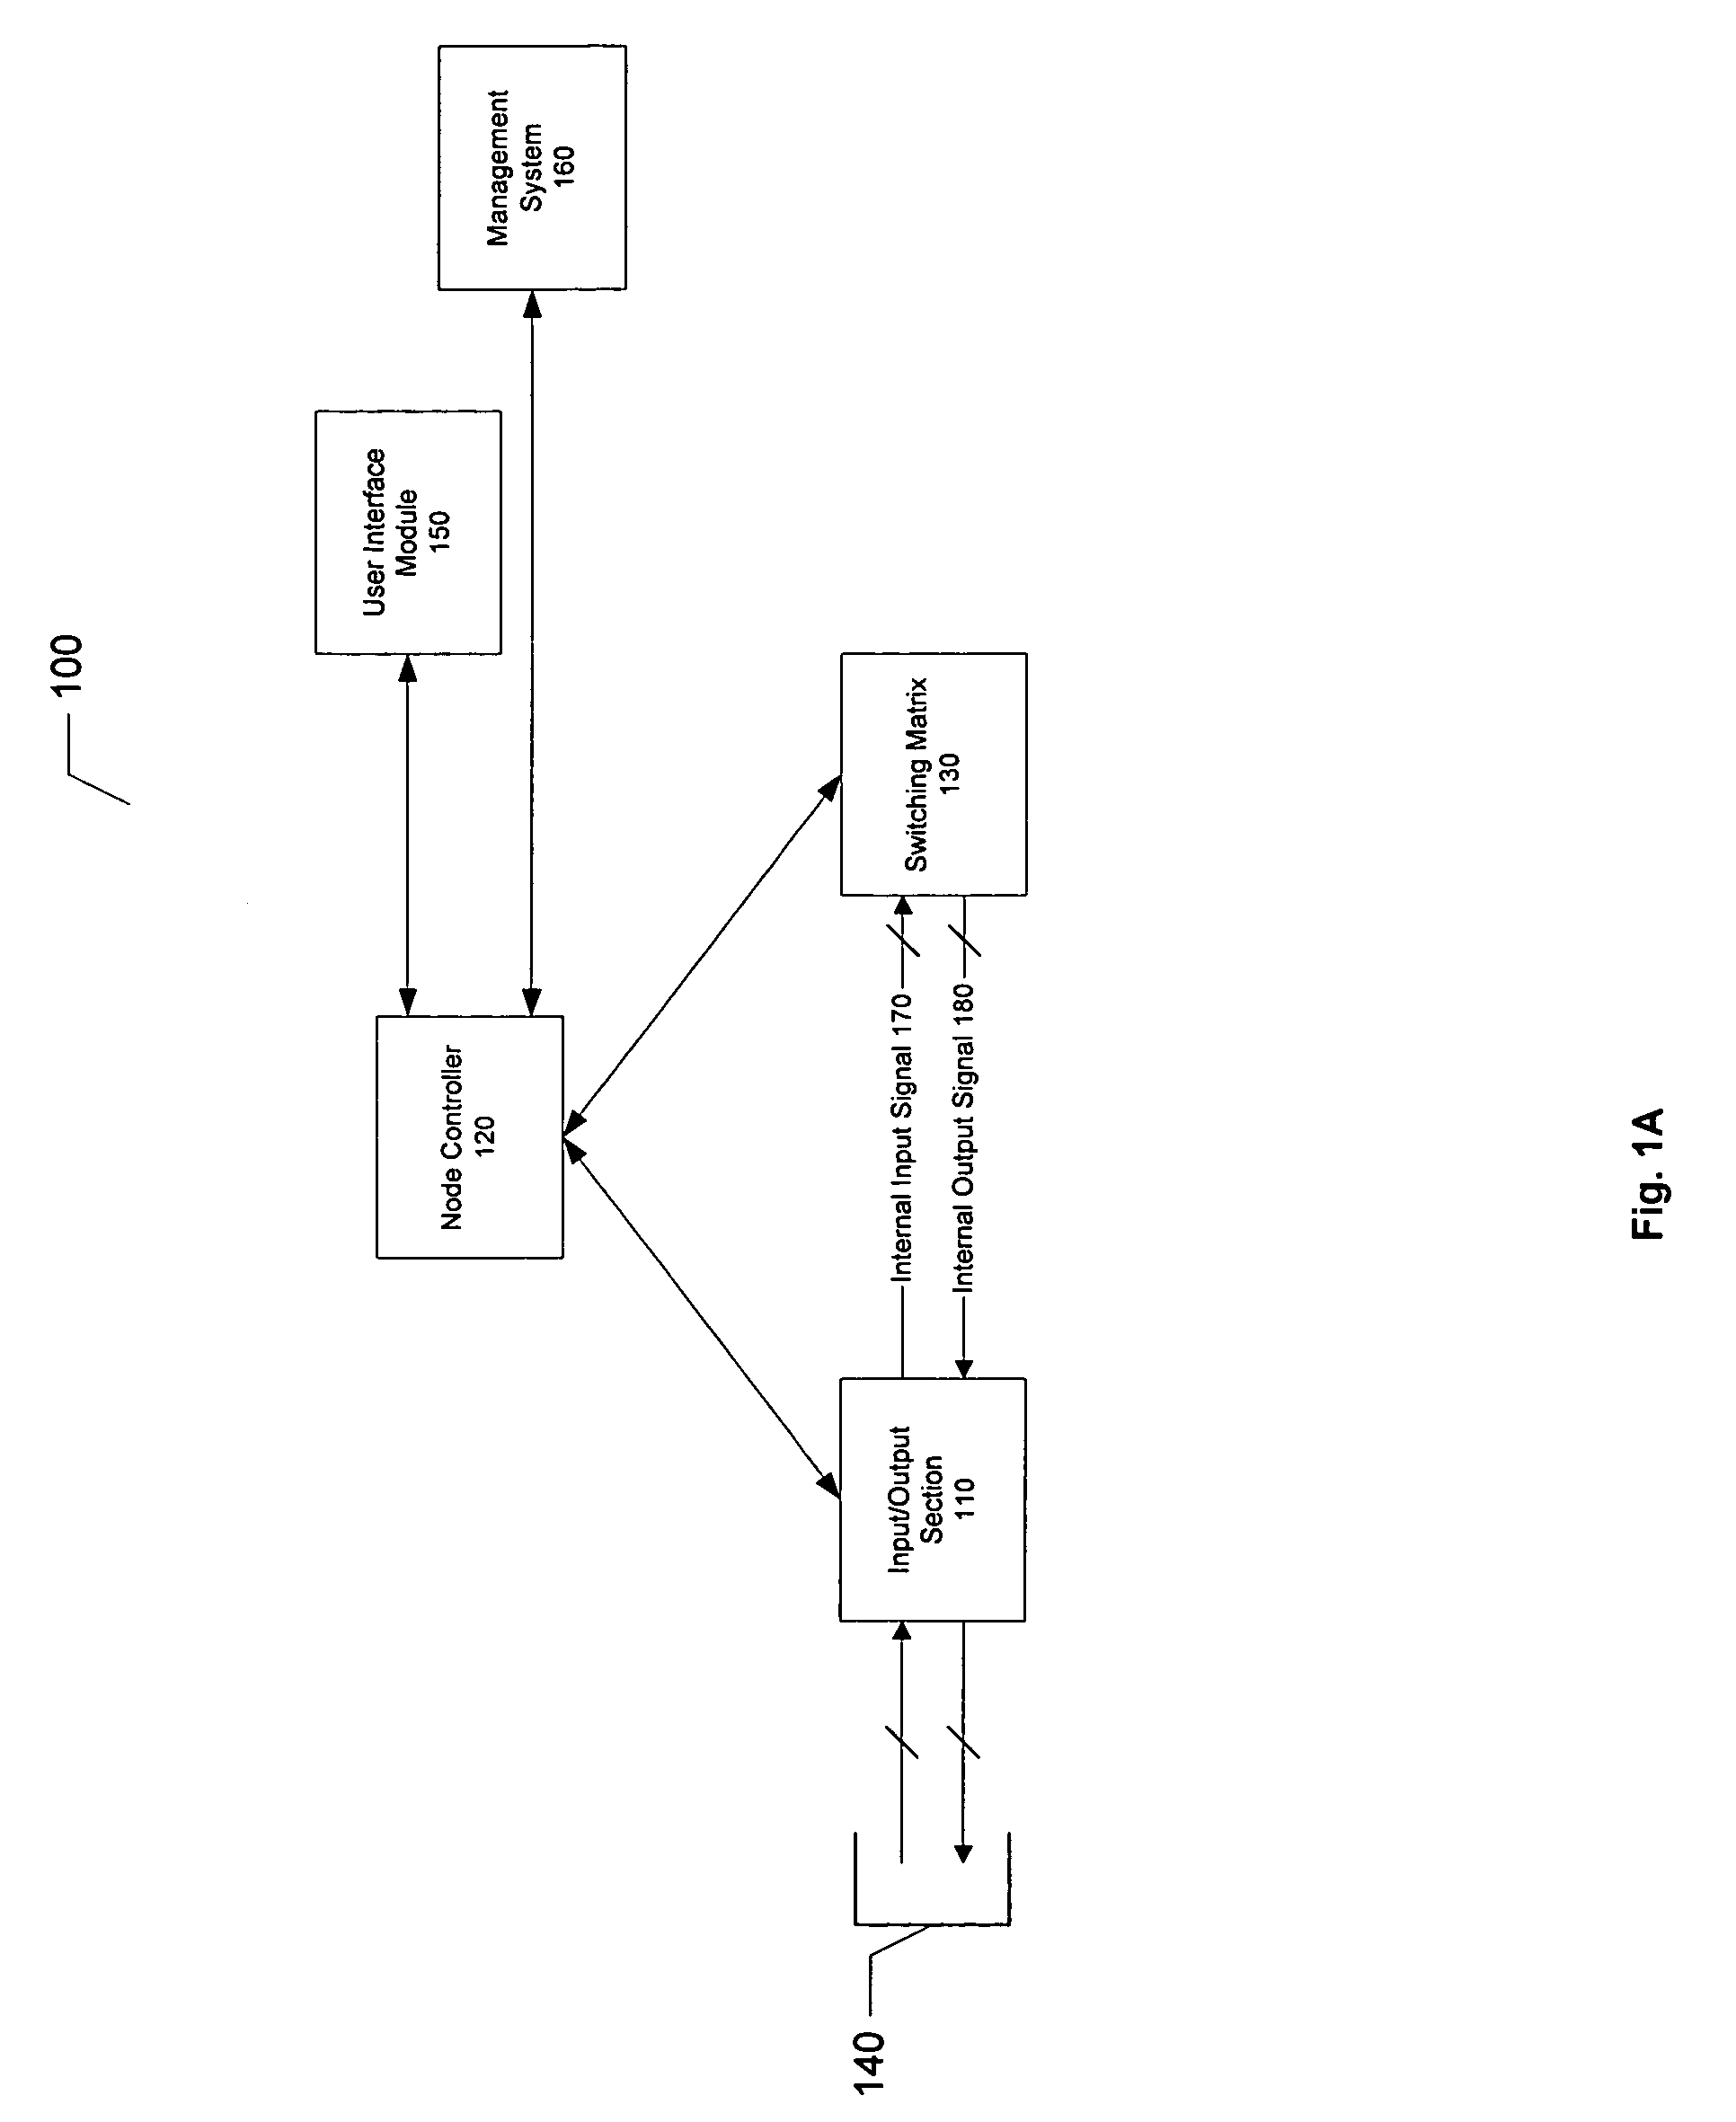 Resource management protocol for a configurable network router